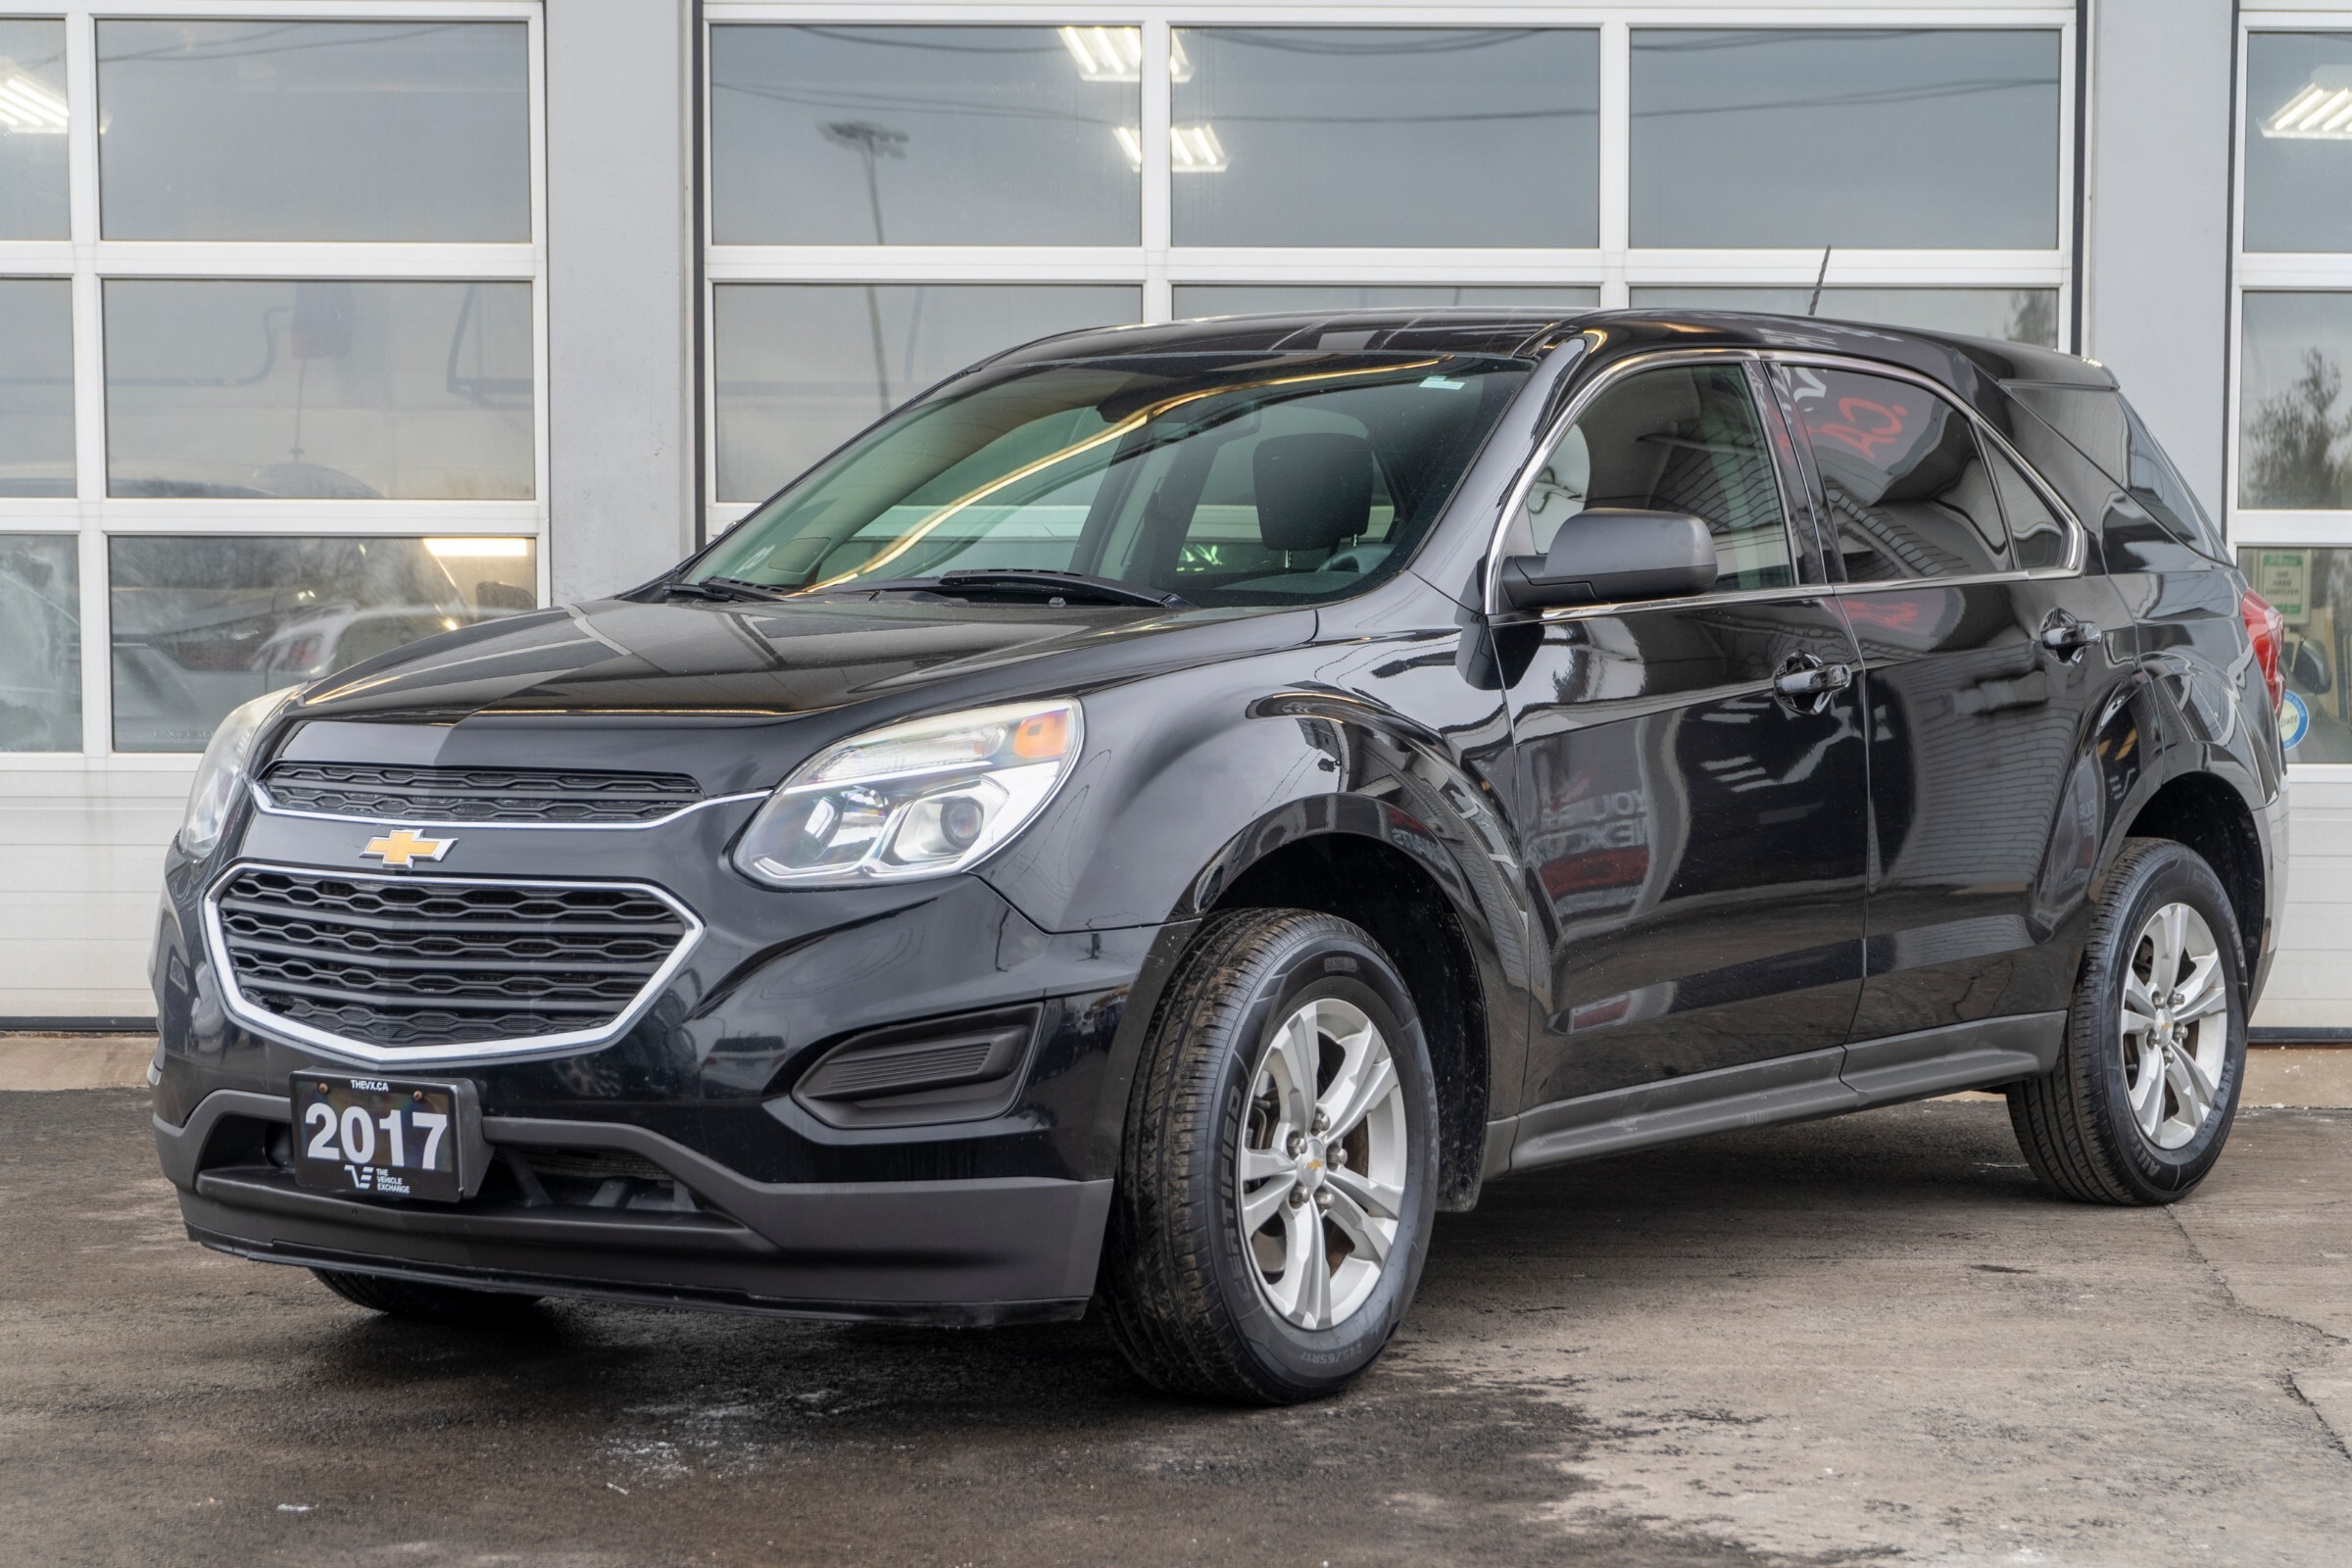 2017 Chevrolet Equinox LS| 2.4L 4Cyl| Local Trade| Bluetooth| Heated Seat